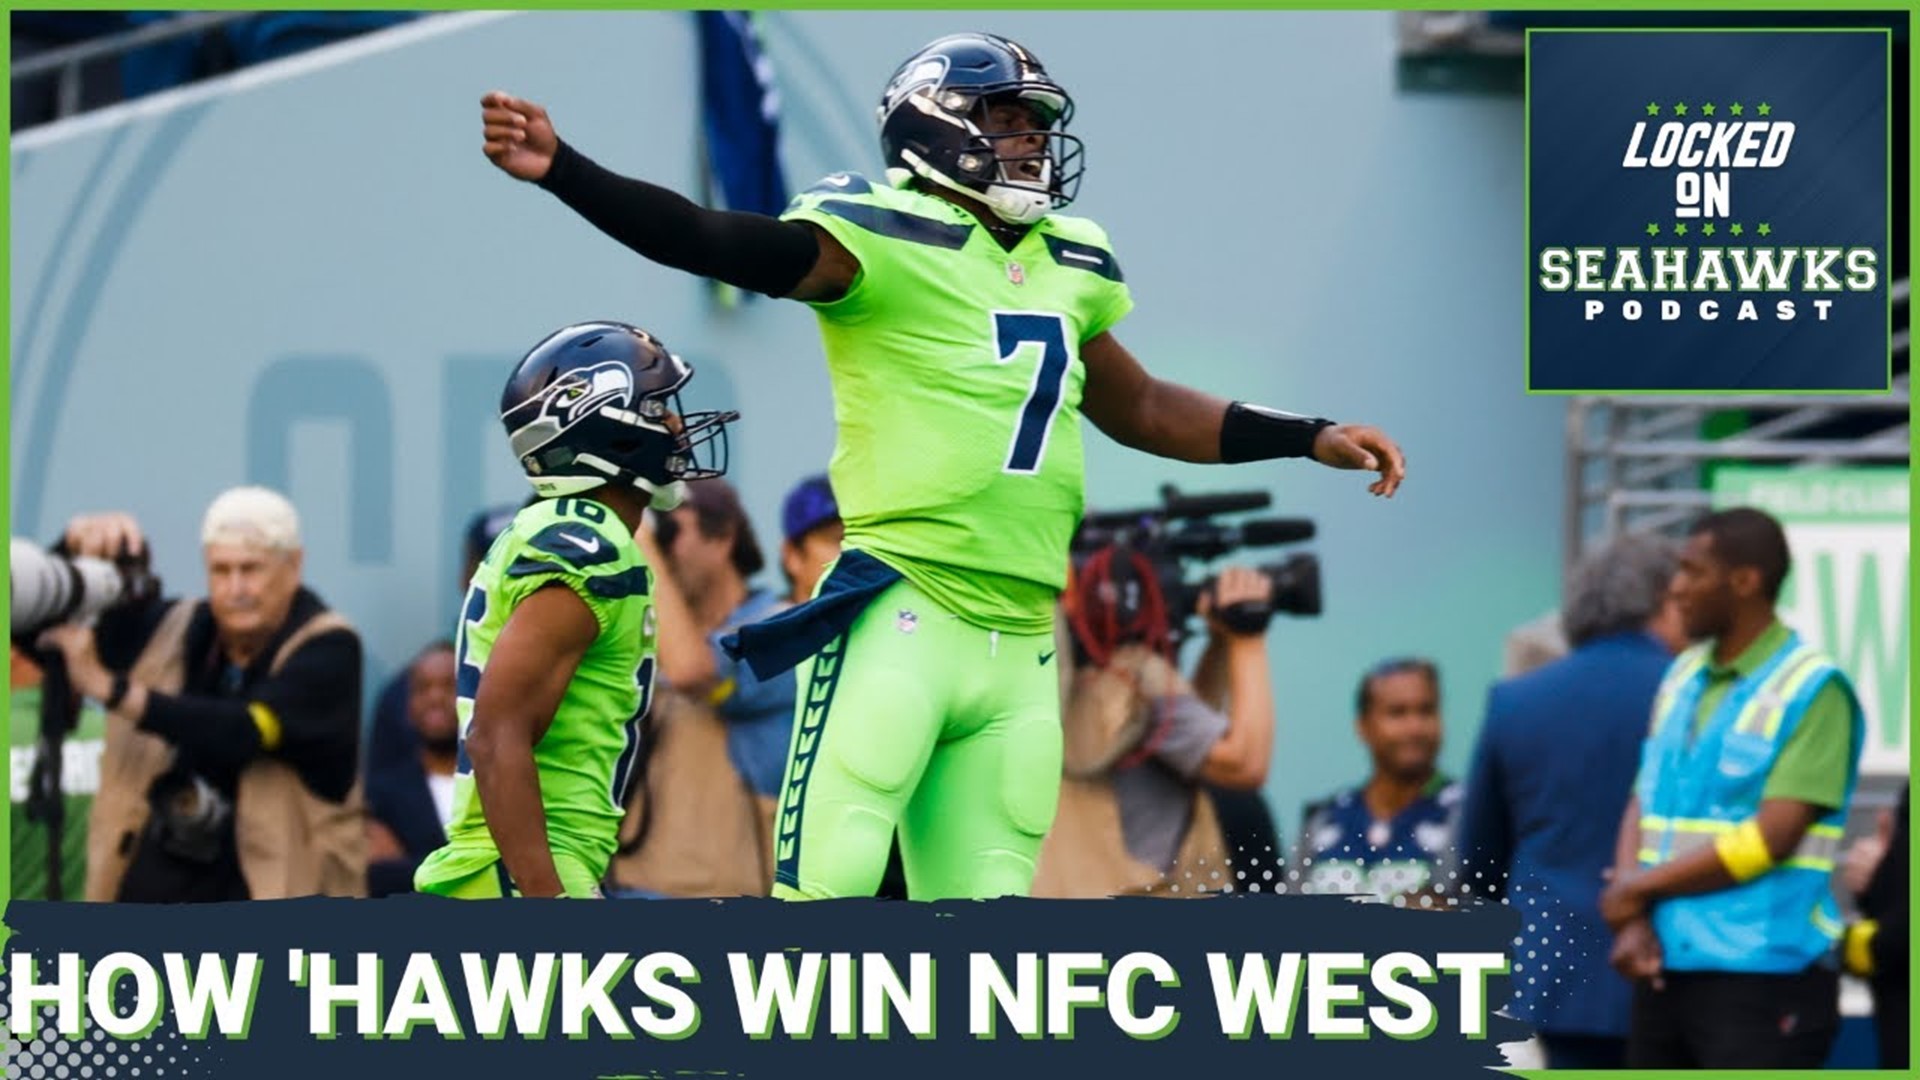 Coming off their bye week, the Seahawks are well-positioned to push for an NFC West title with five of their final seven games coming at Lumen Field.